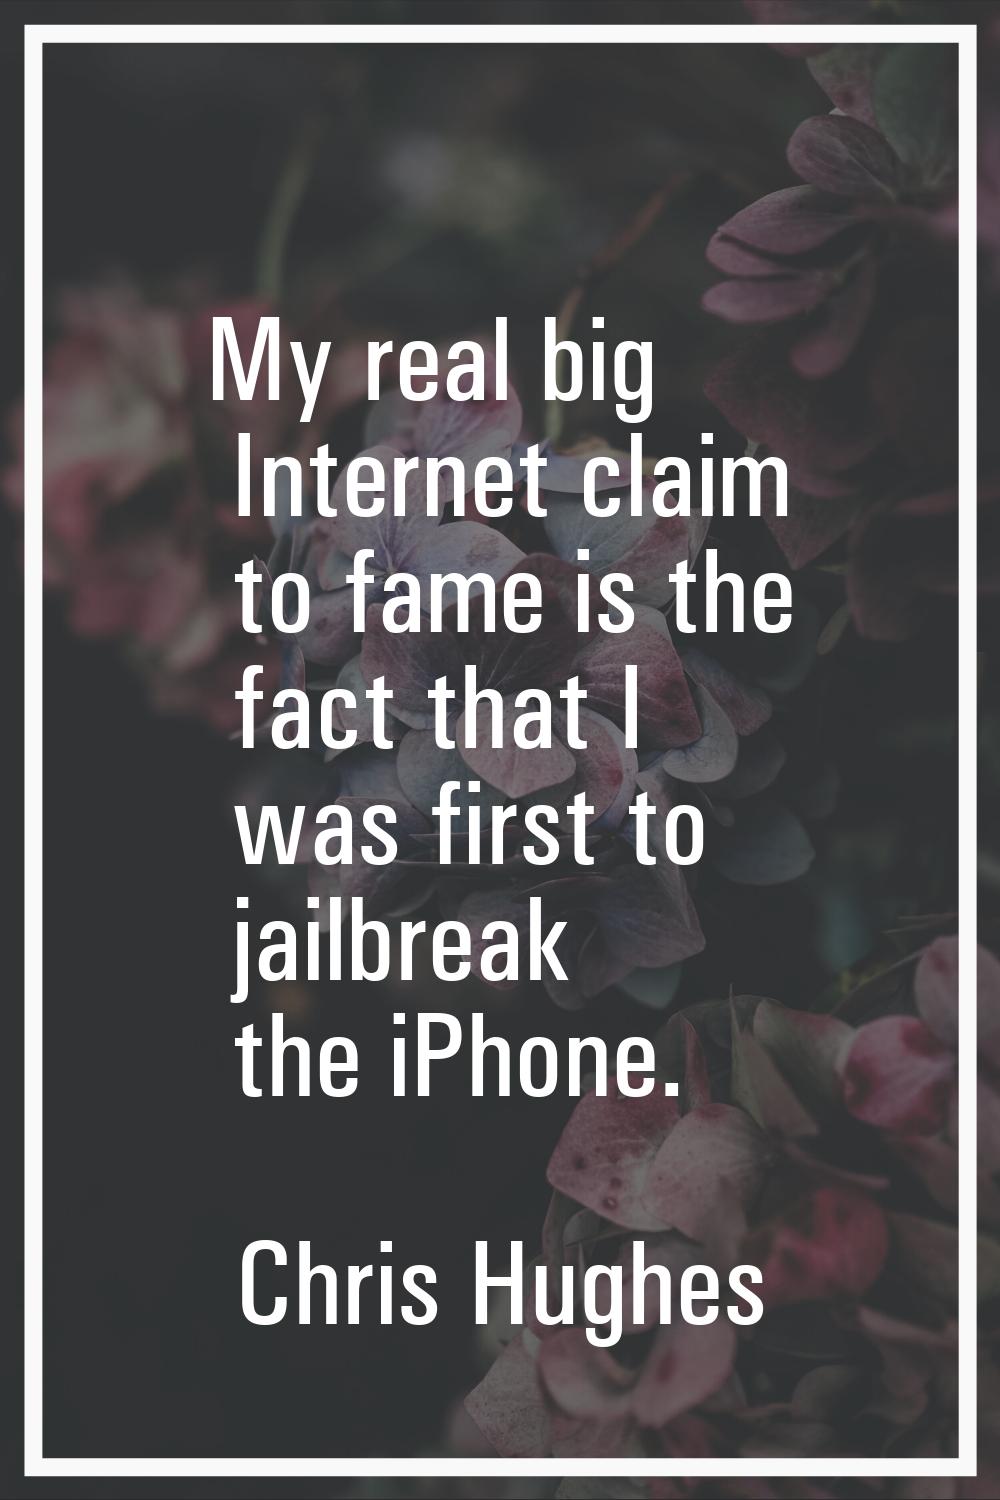 My real big Internet claim to fame is the fact that I was first to jailbreak the iPhone.